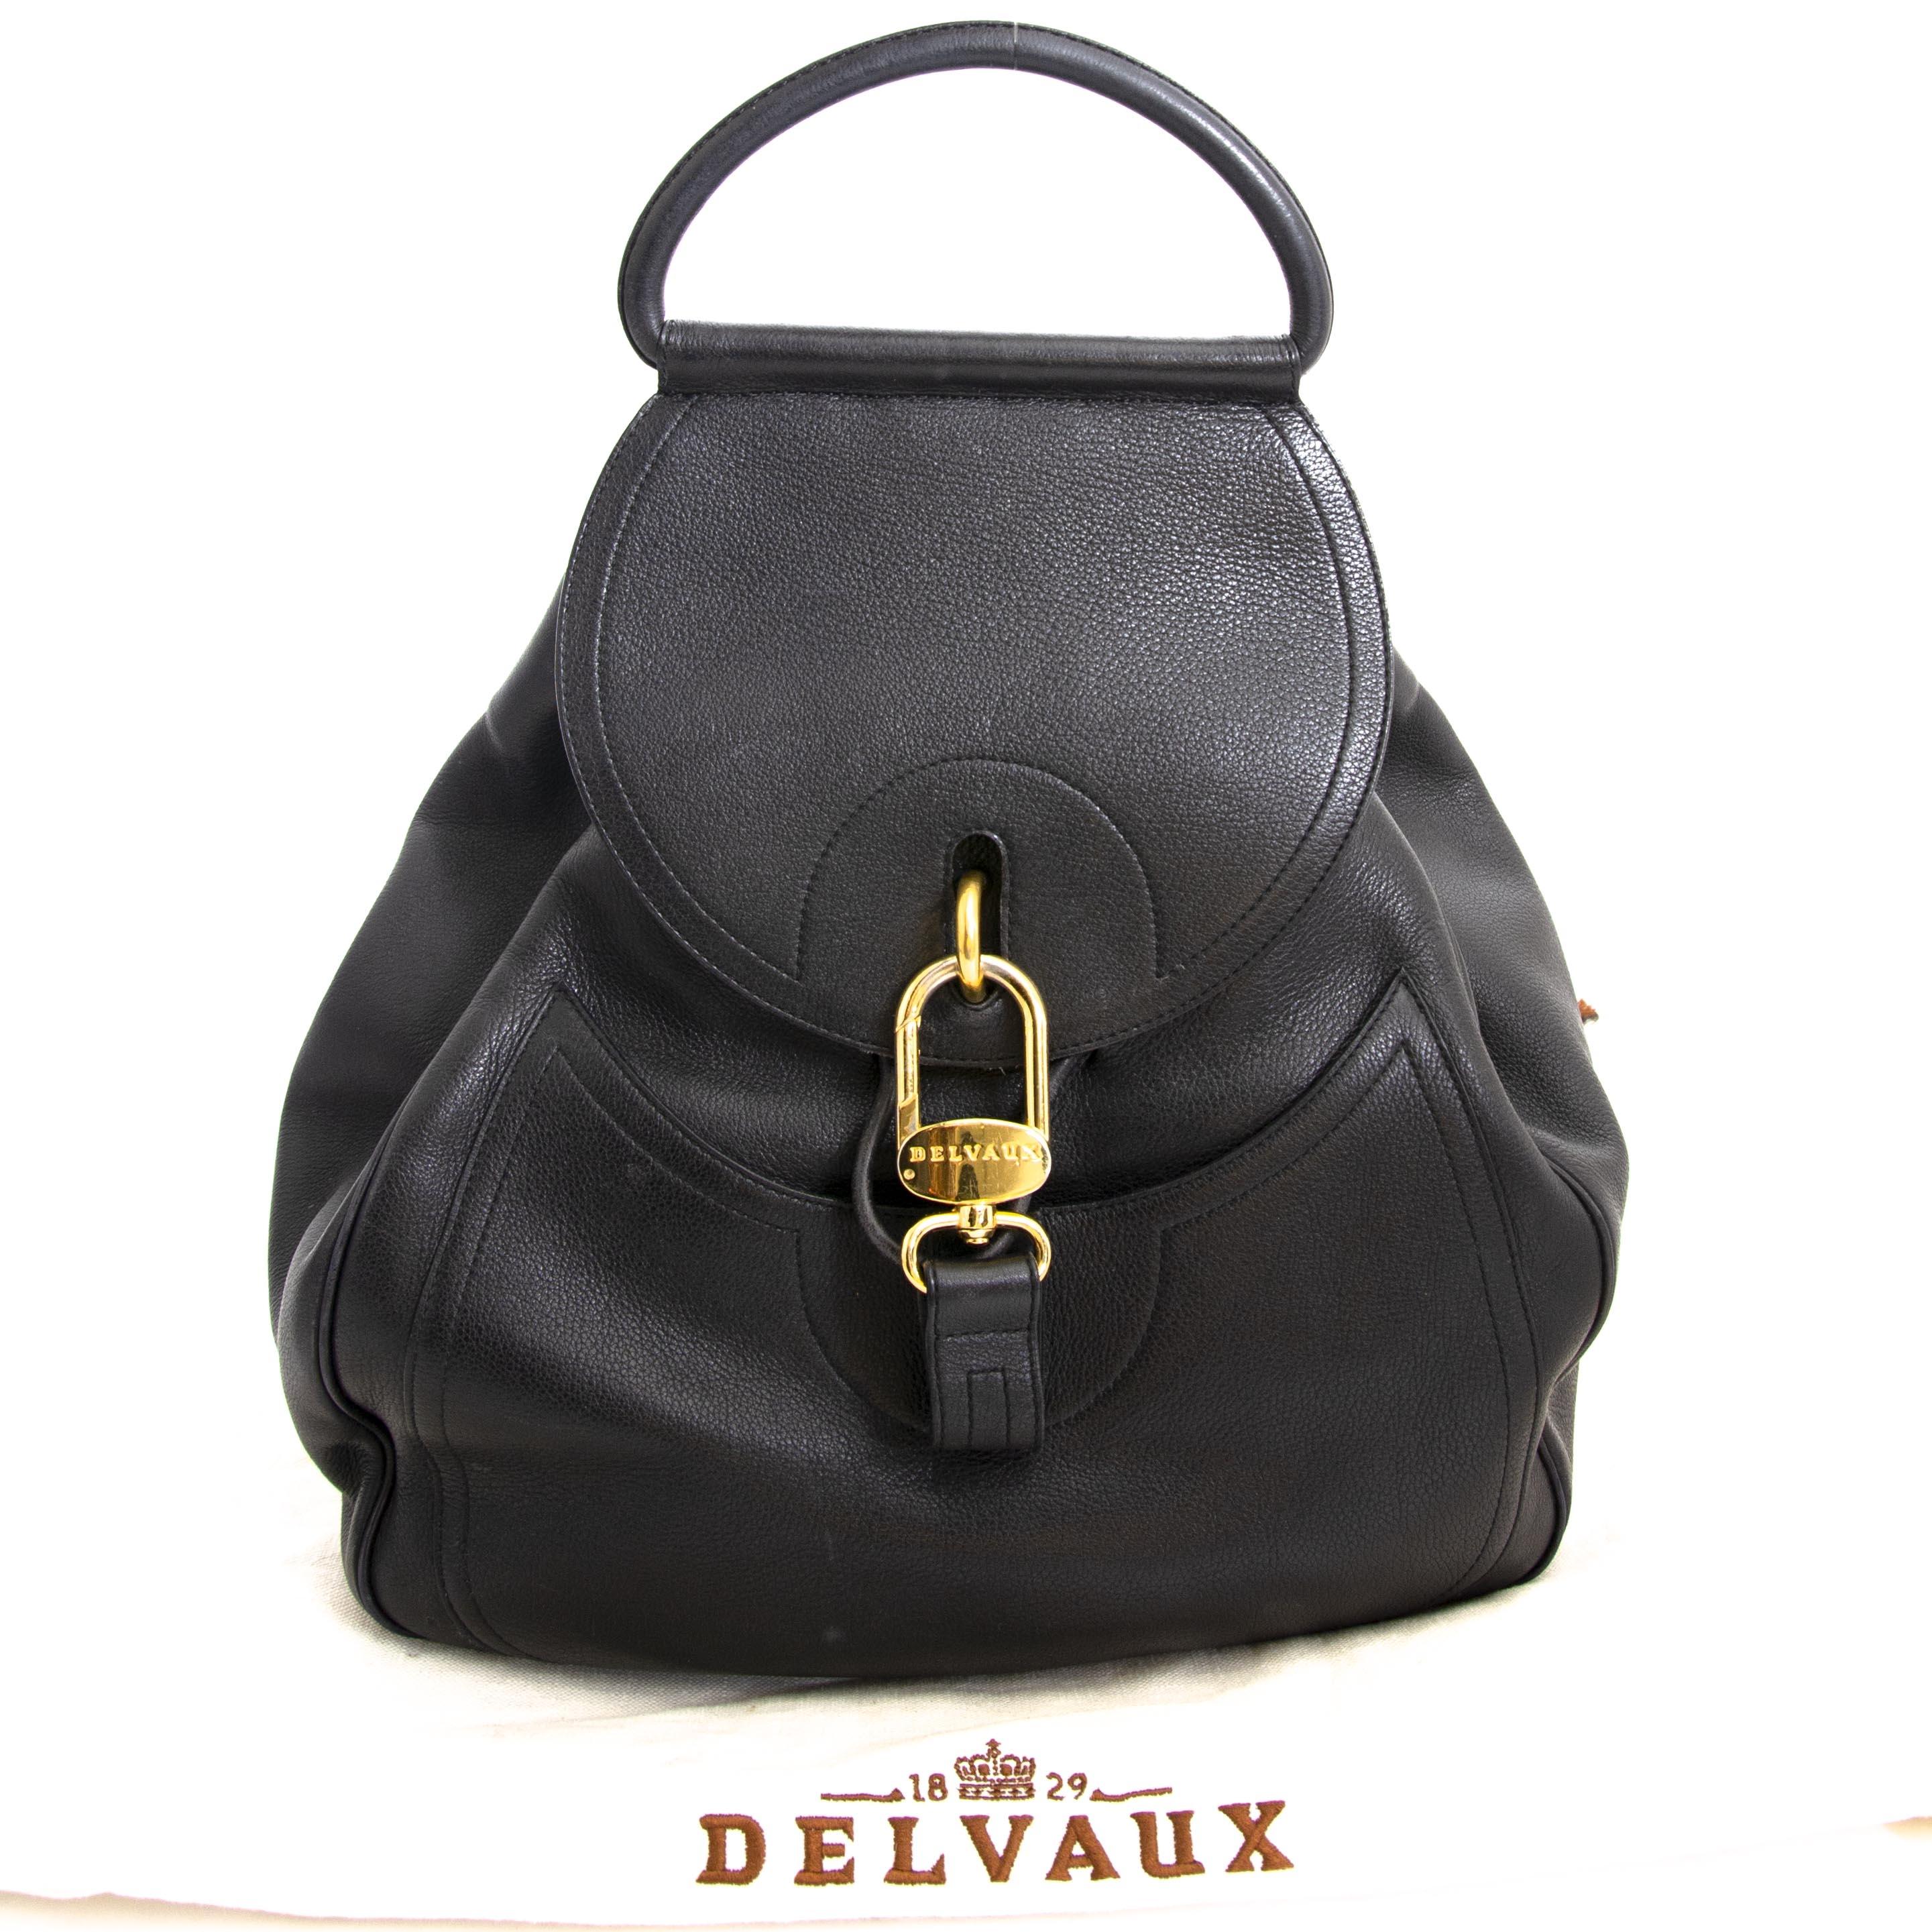 Good condition

Delvaux Black Lucifer GM Backpack

This super practical lucifer backpack is the perfect everyday bag. 
Travel handsfree in style wherever you go, with this all black Delvaux Leather Lucifer GM bag.
Safety first with the front clasp